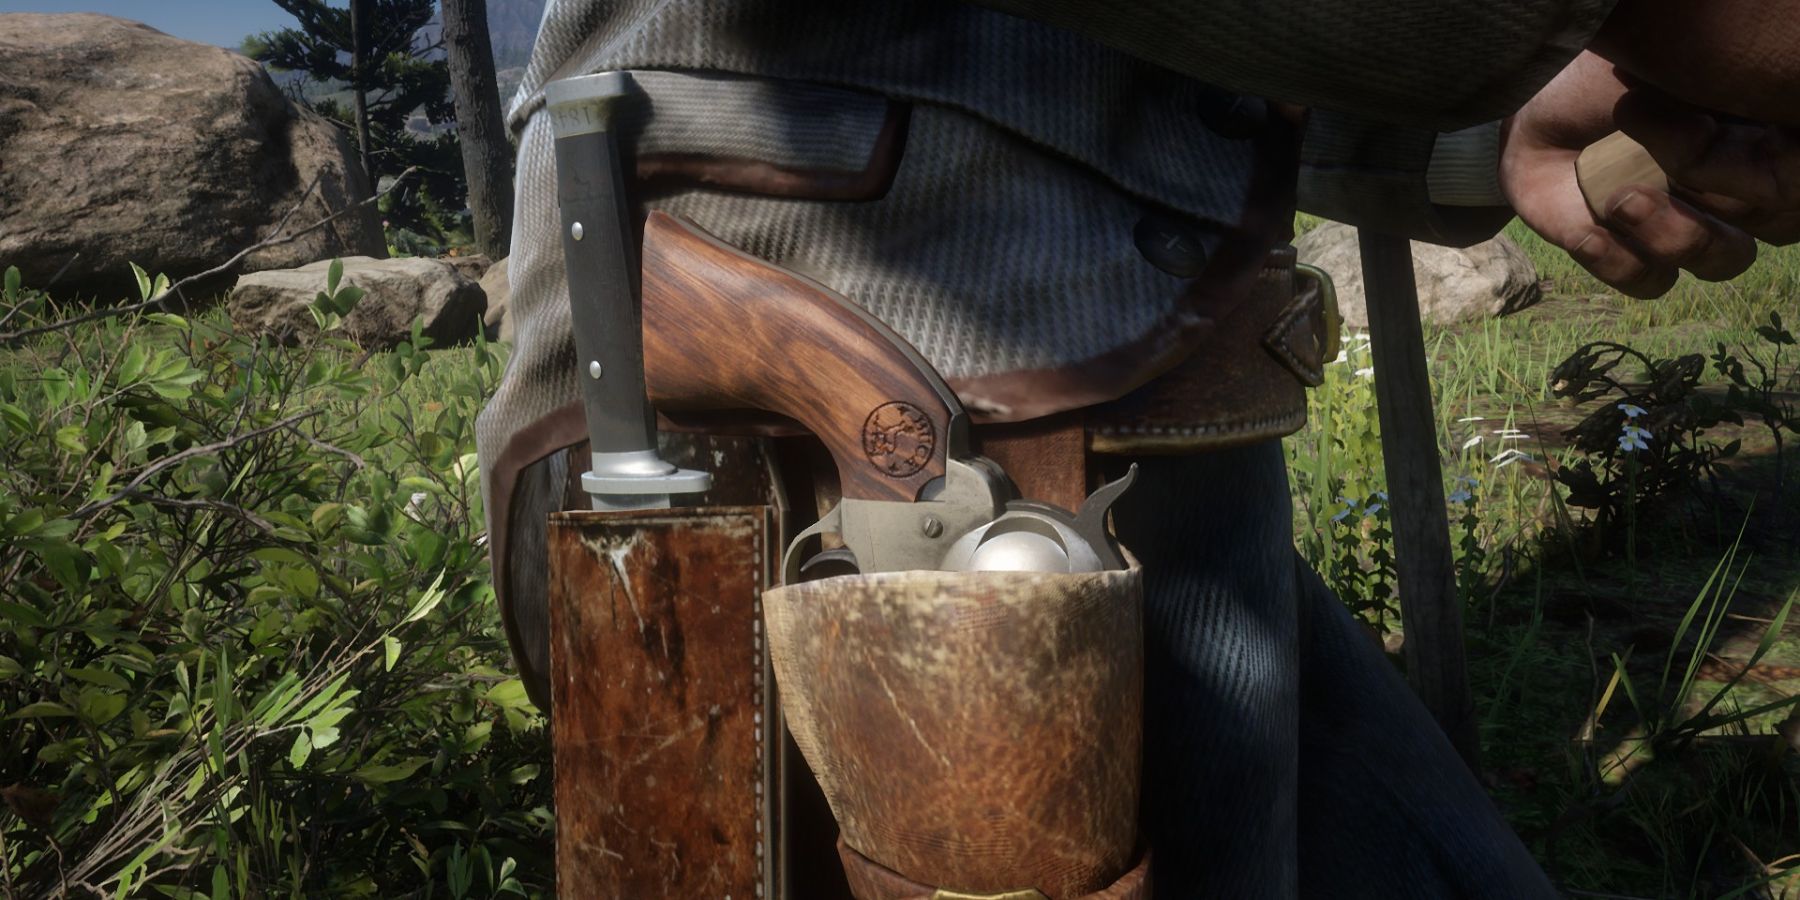 Sean MacGuire's Cattleman Revolver isn't very notable in RDR2